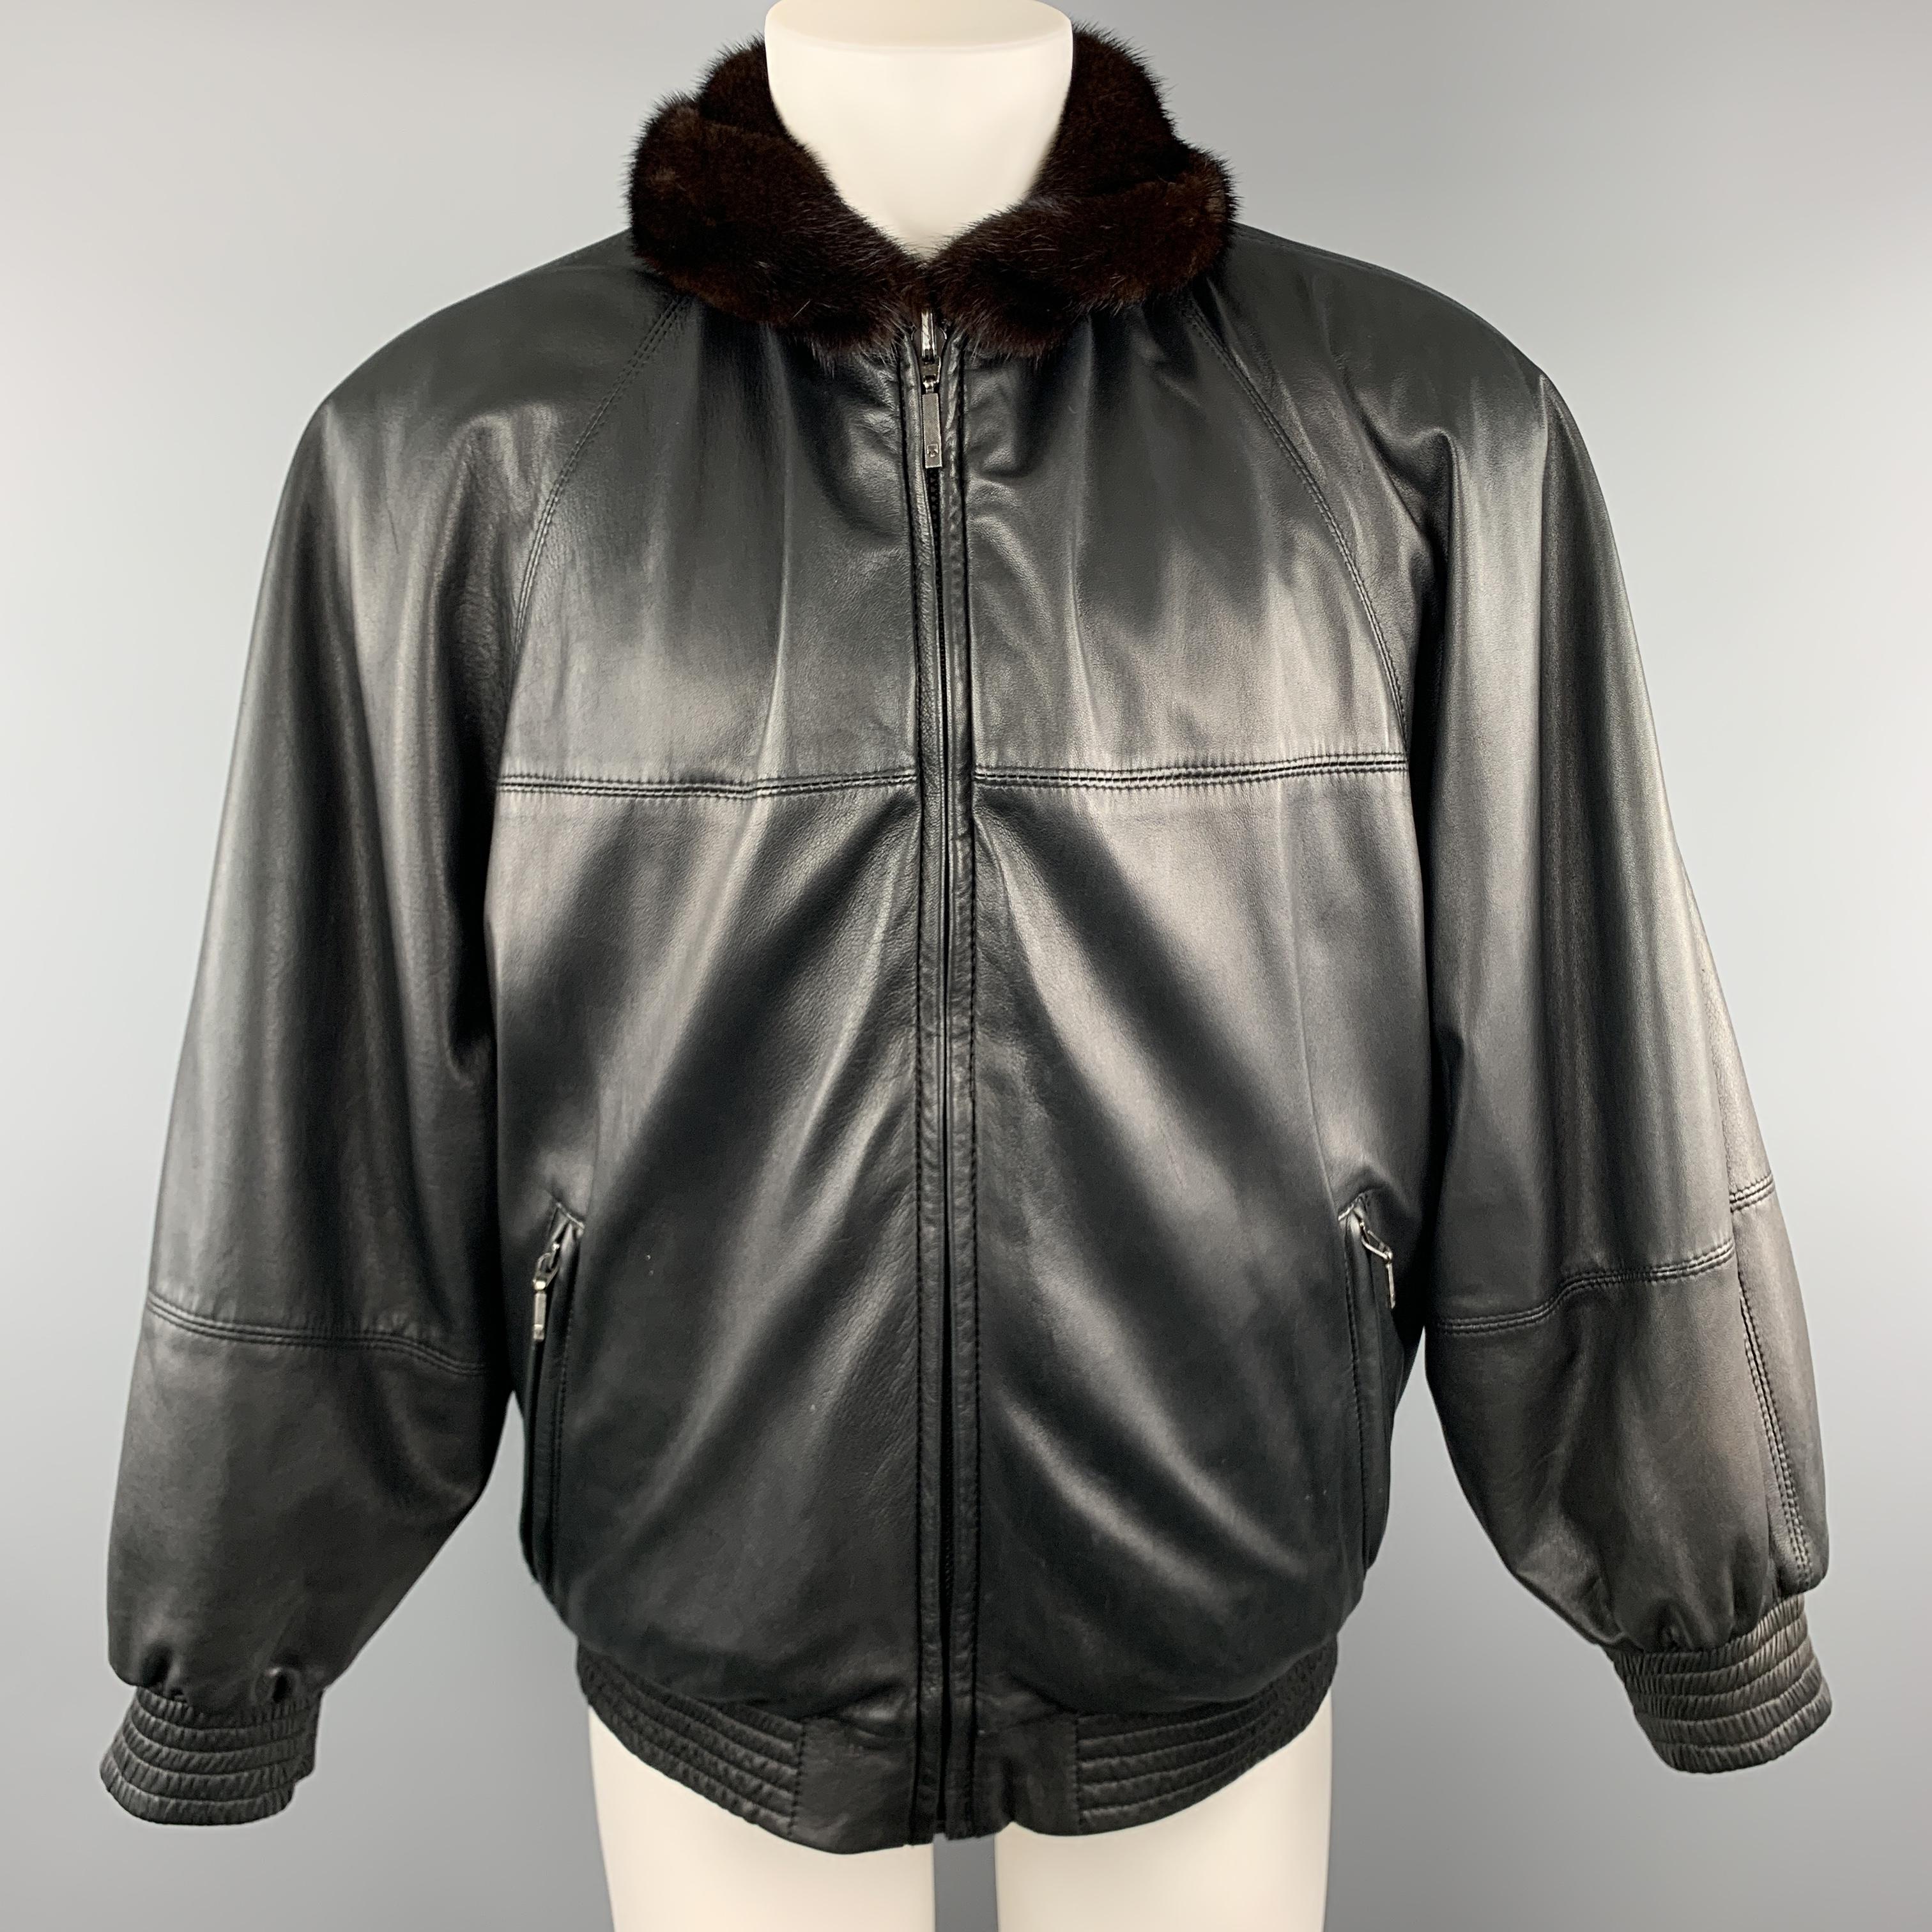 Vintage NEIMEN MARCUS reversible bomber jacket comes in brown fur with a folded collar, zip front and pockets, and reverse black leather side. 

Excellent Pre-Owned Condition.
Marked: (no size)

Measurements:

Shoulder: 18 in.
Chest: 50 in.
Sleeve: